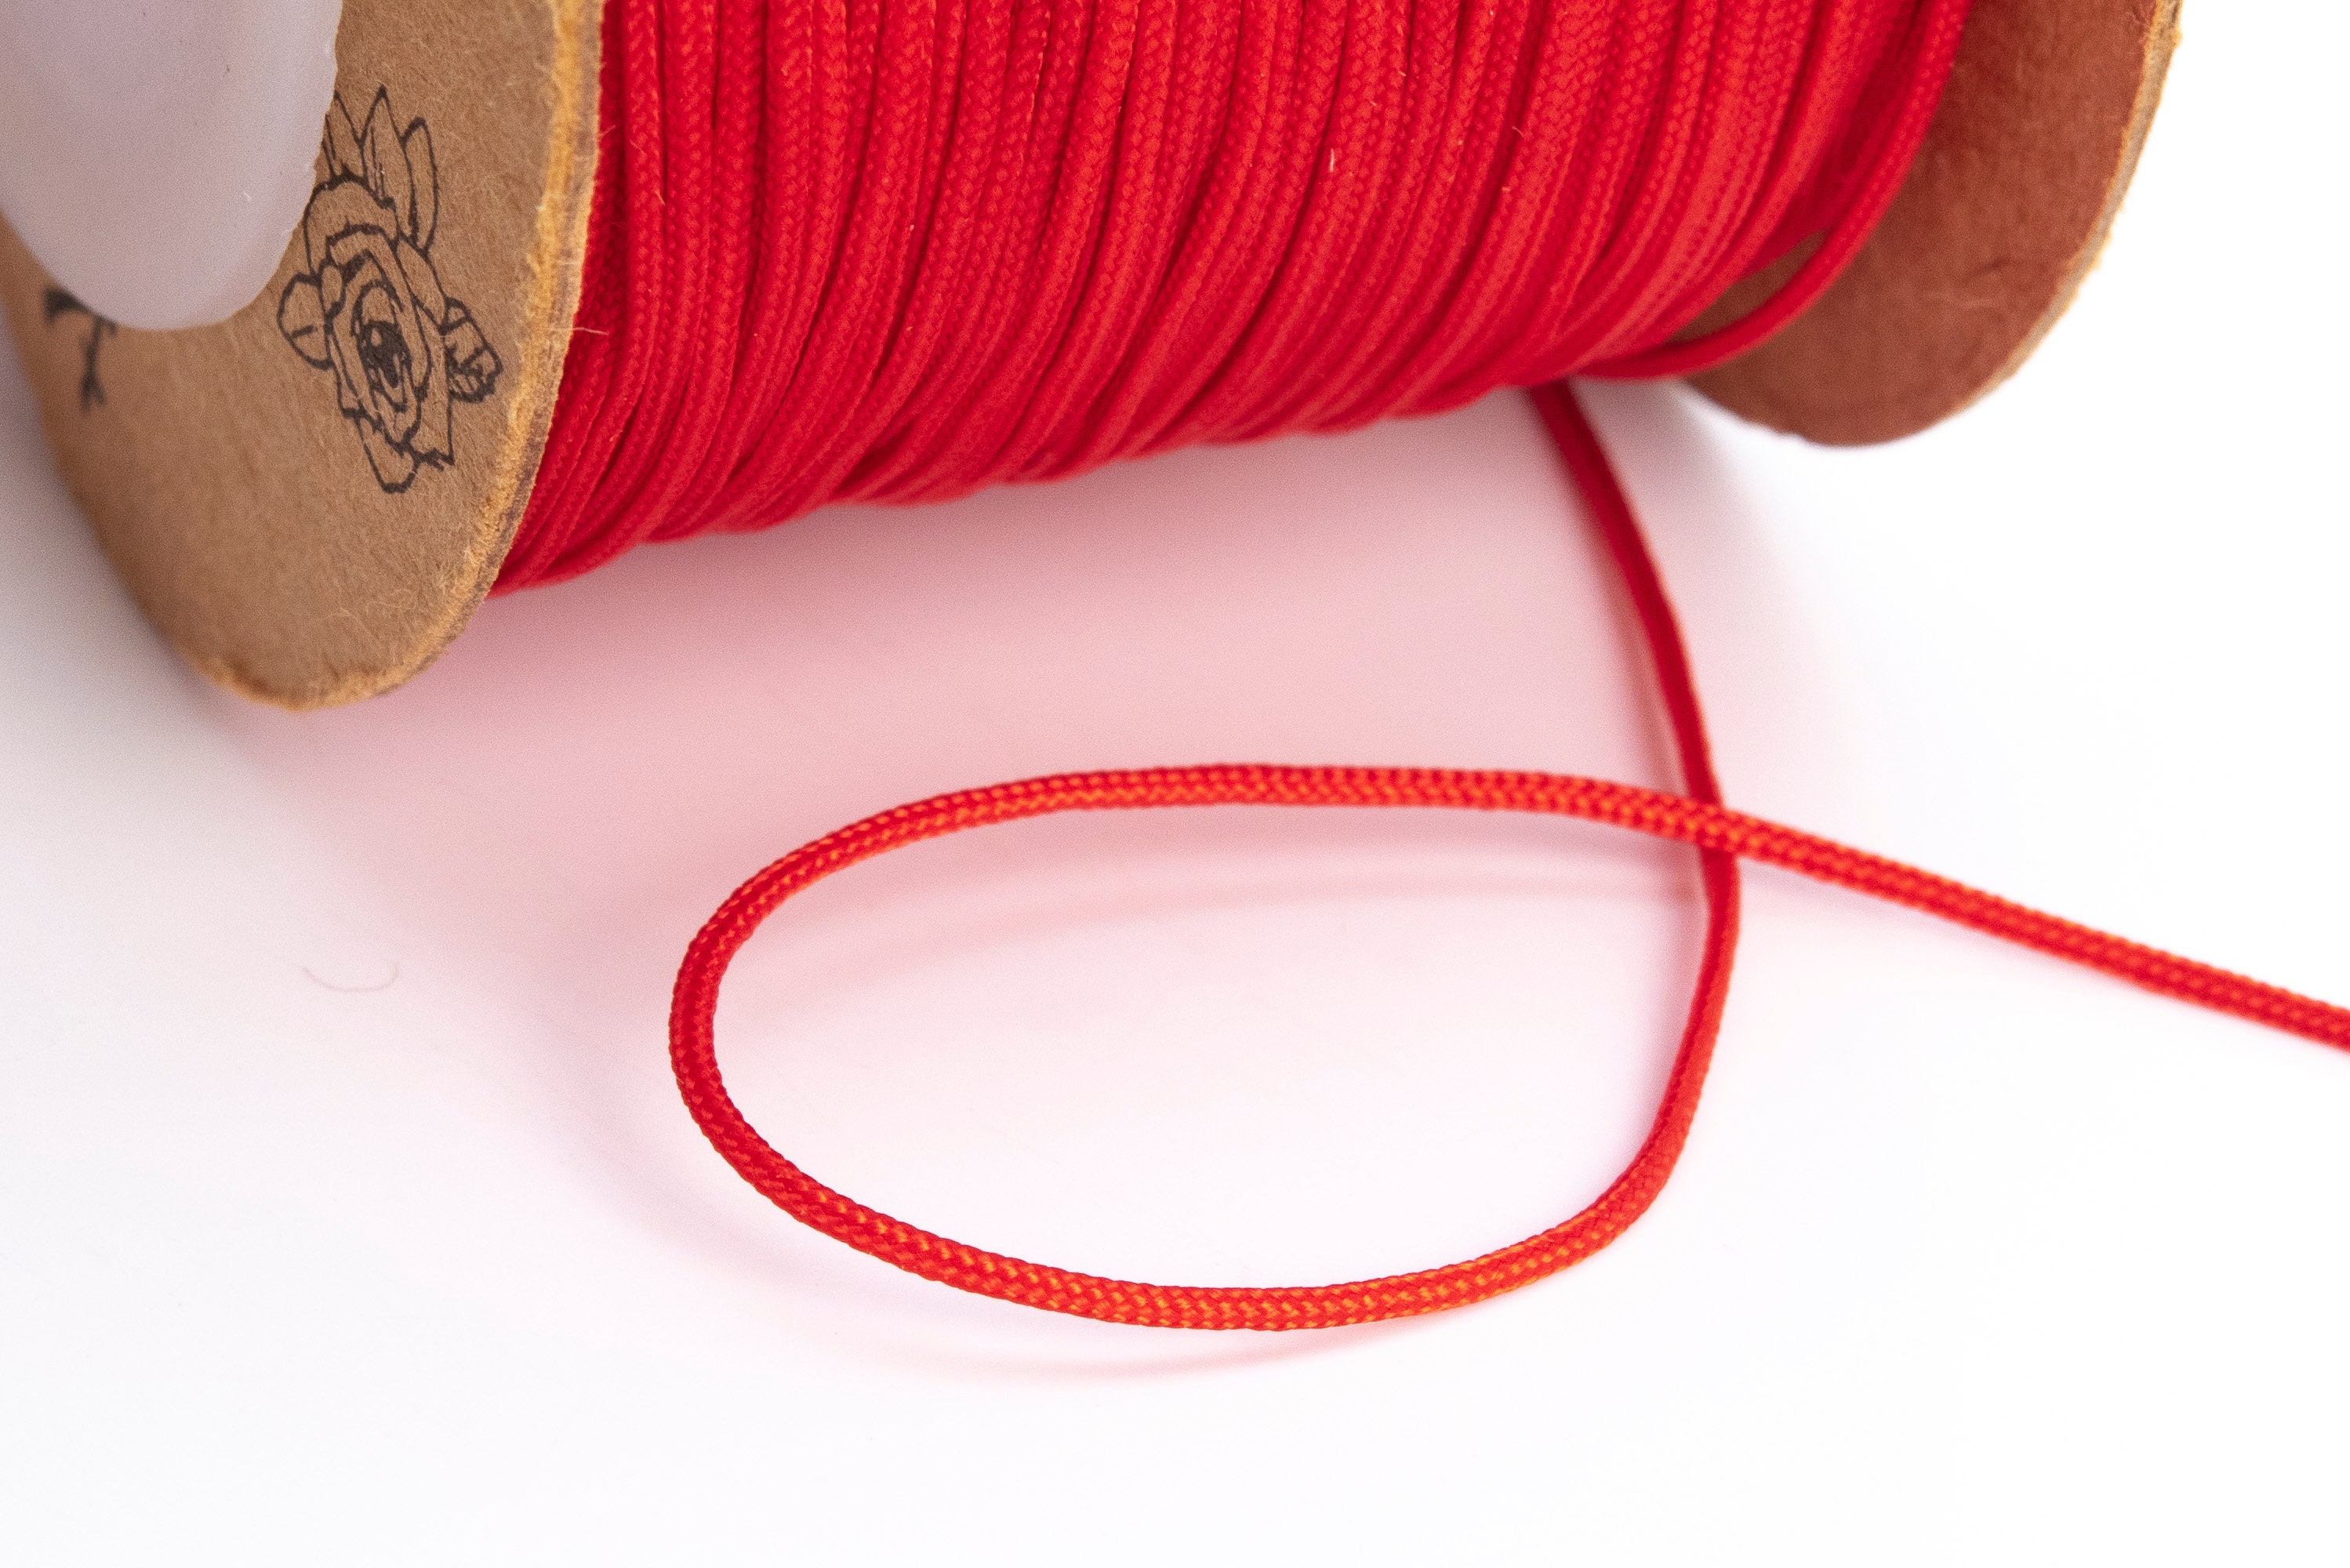 High Quality 0.8MM Red Knotting Macrame Cord Braided Thread No Elasticity 1  Spool 80 Meters Bulk Lot Options 64053-S2453 